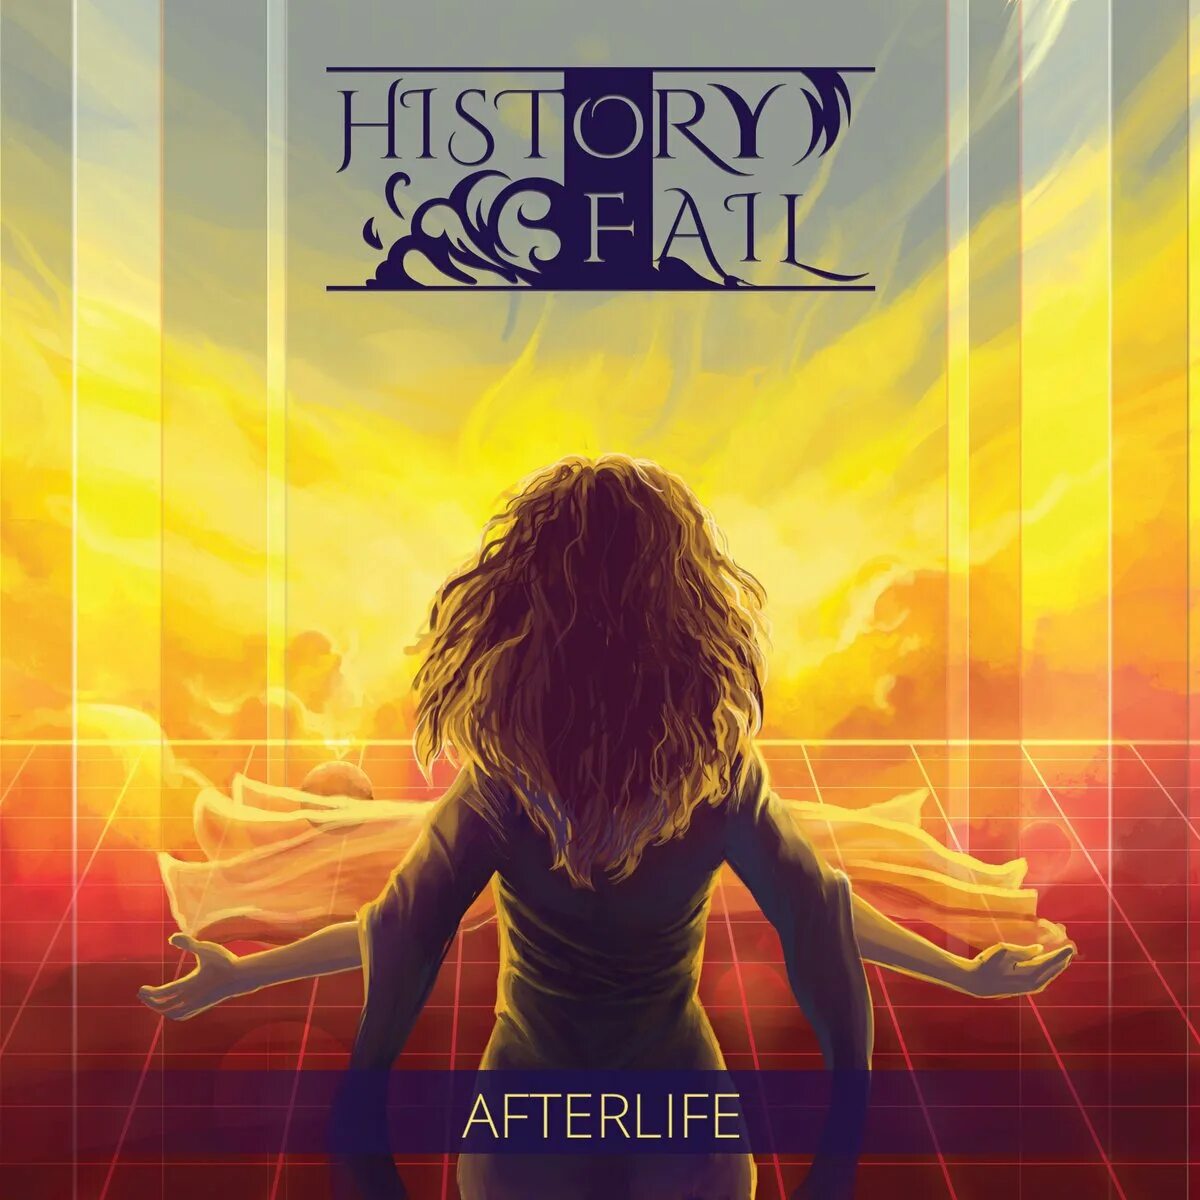 Year after life. Afterlife. Afterlife обложка. Afterlife картинки. Afterlife album.